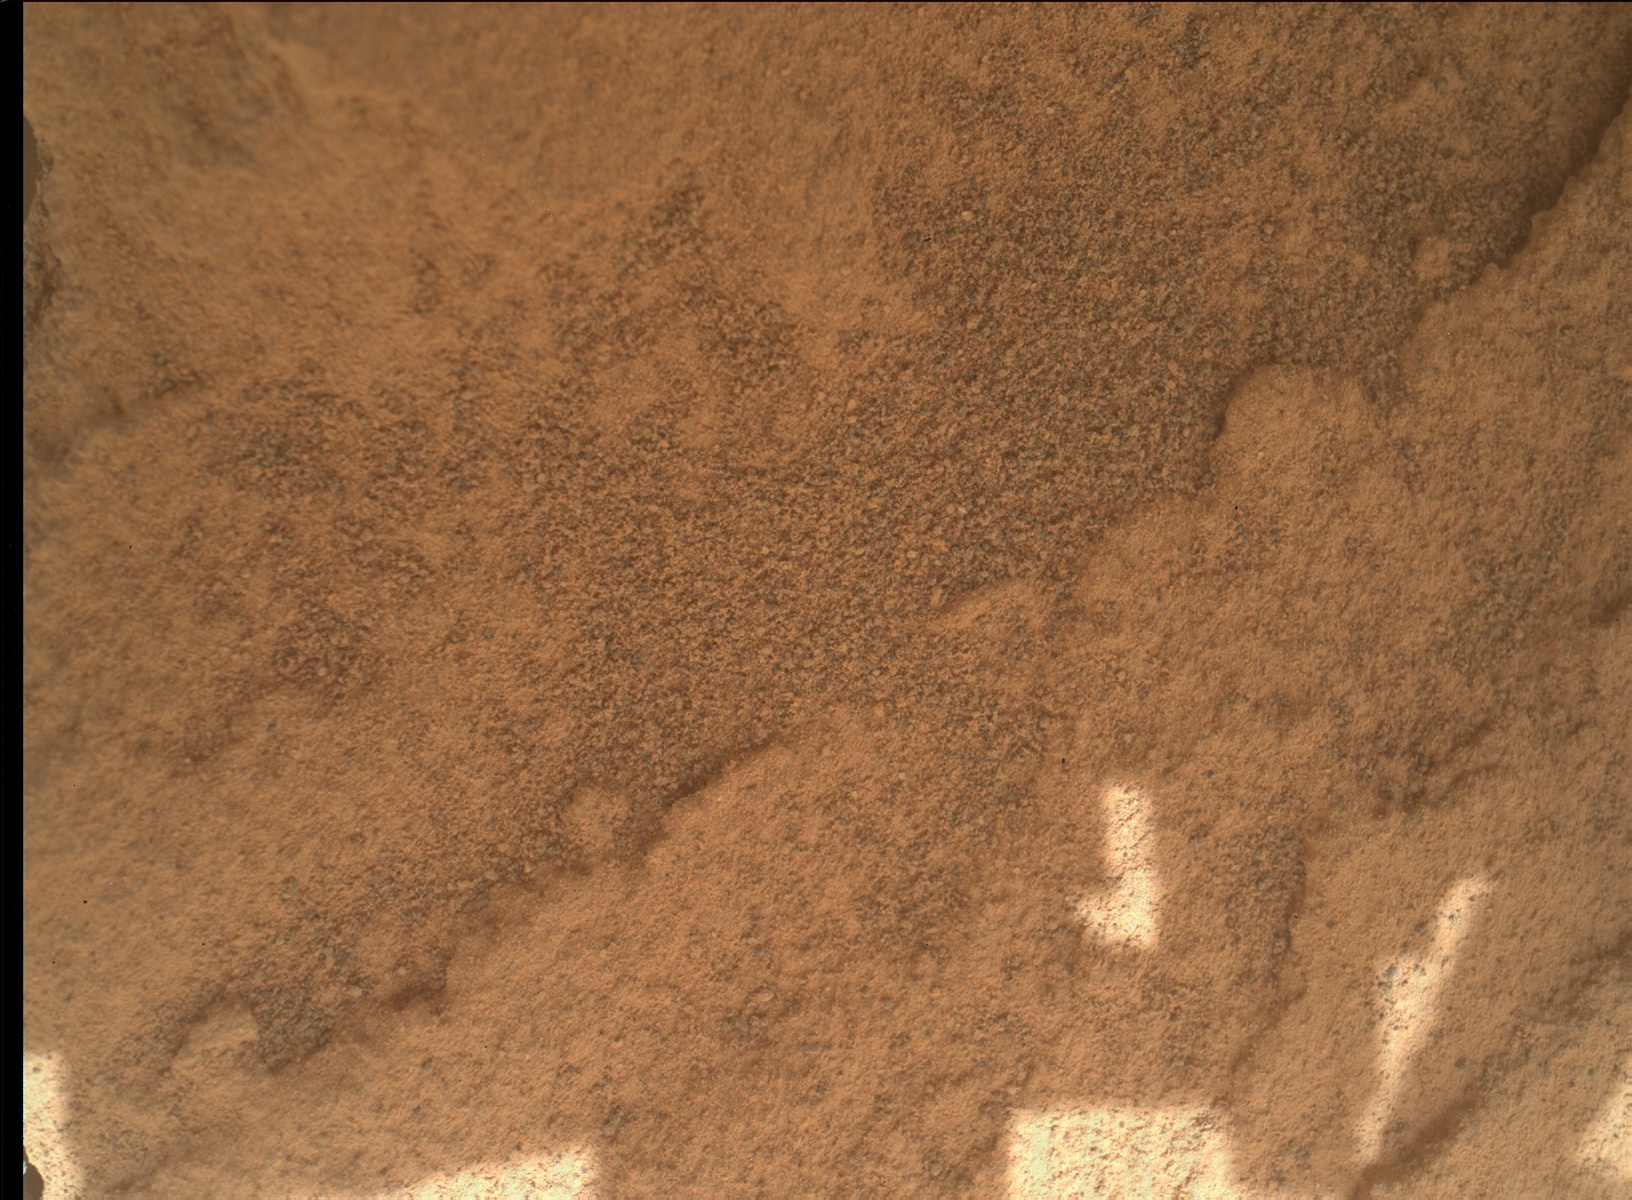 Nasa's Mars rover Curiosity acquired this image using its Mars Hand Lens Imager (MAHLI) on Sol 3465